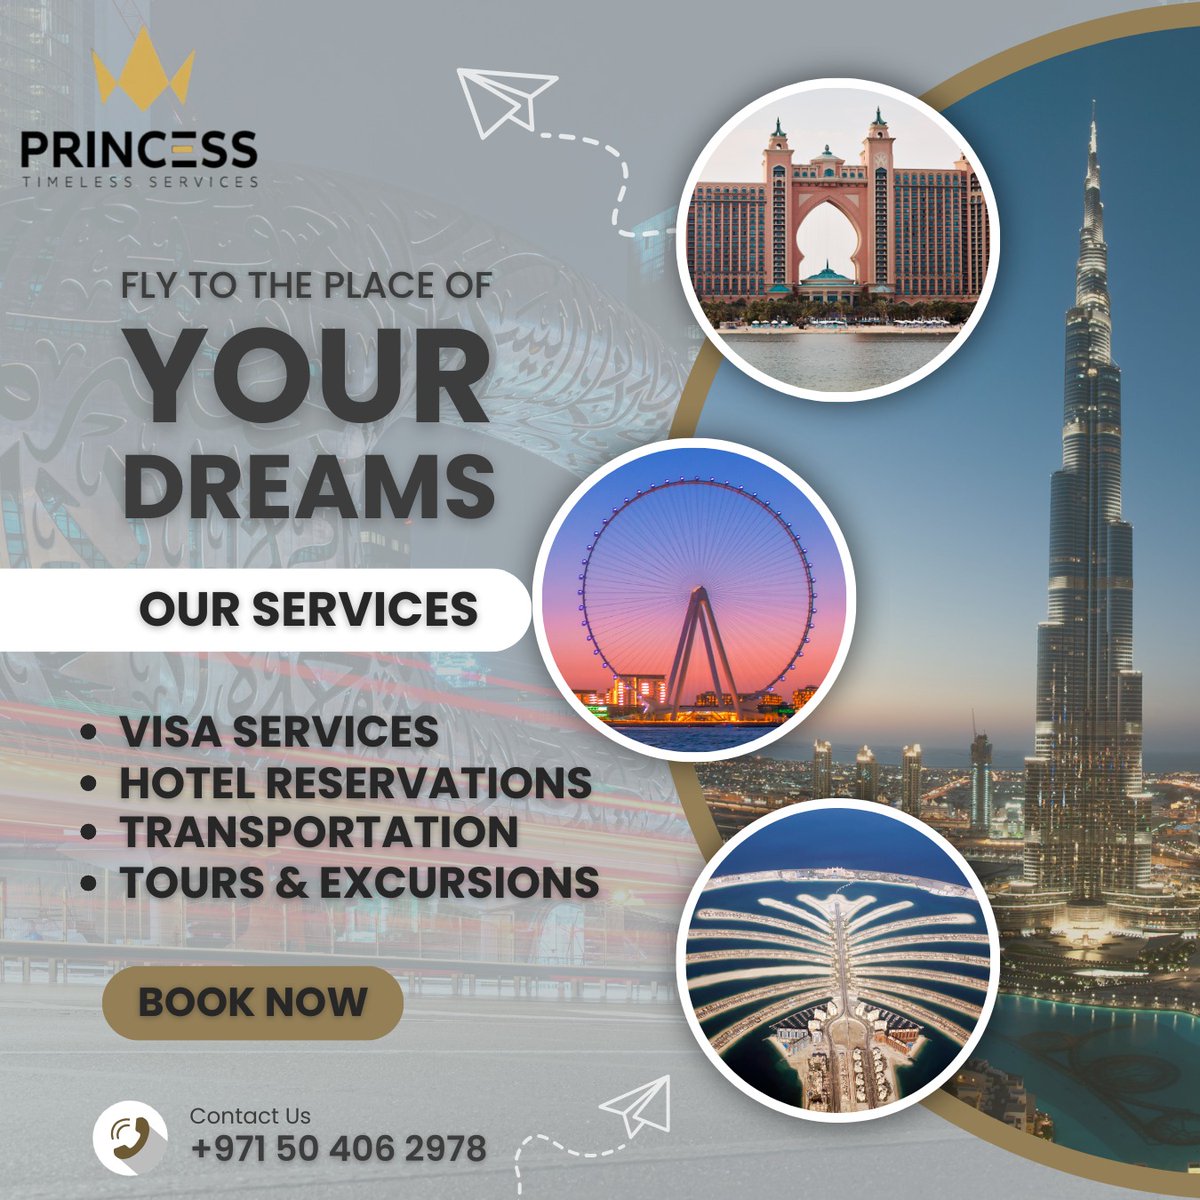 Your needs, our priority. Service at its finest.

#princesstourism #uaeservices #travelandtourism #hotelbooking #flightbooking #visaservices #transportationservices